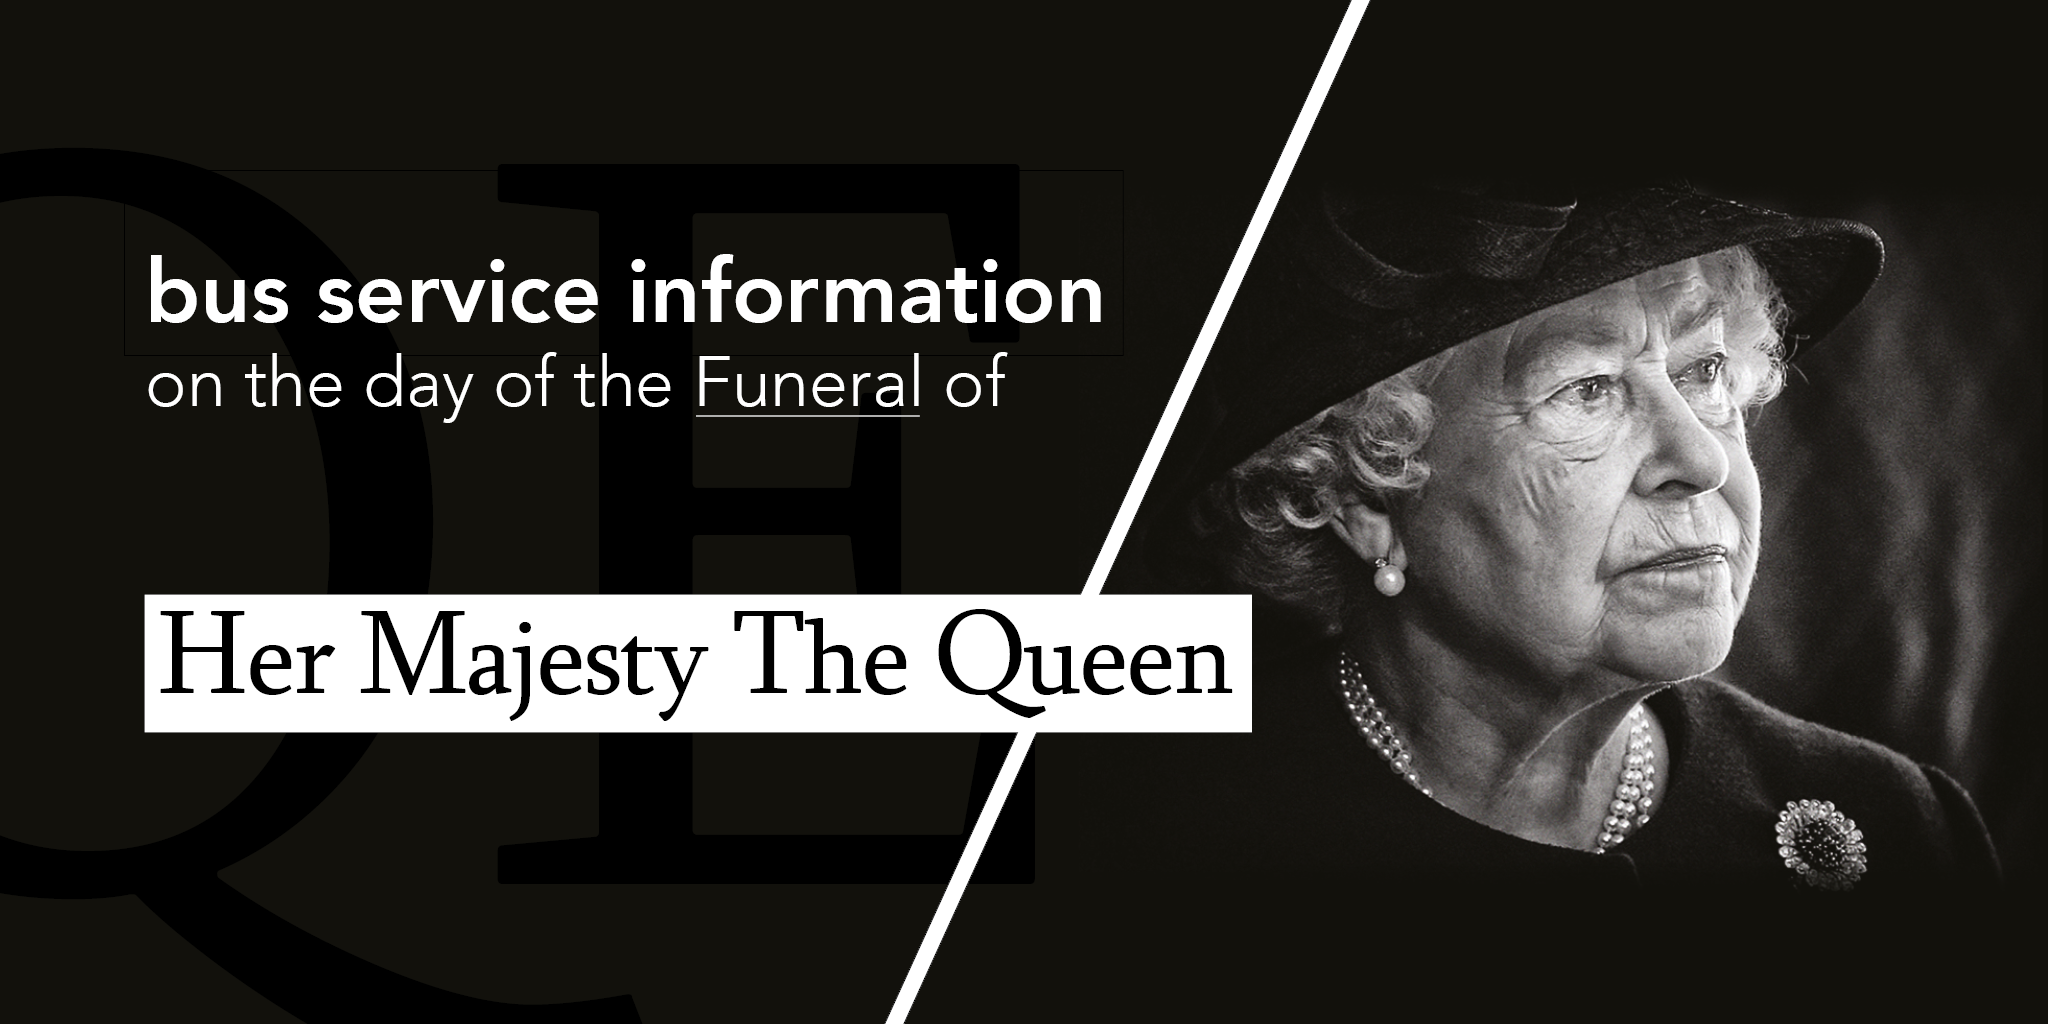 bus service info for the funeral of her majesty the queen